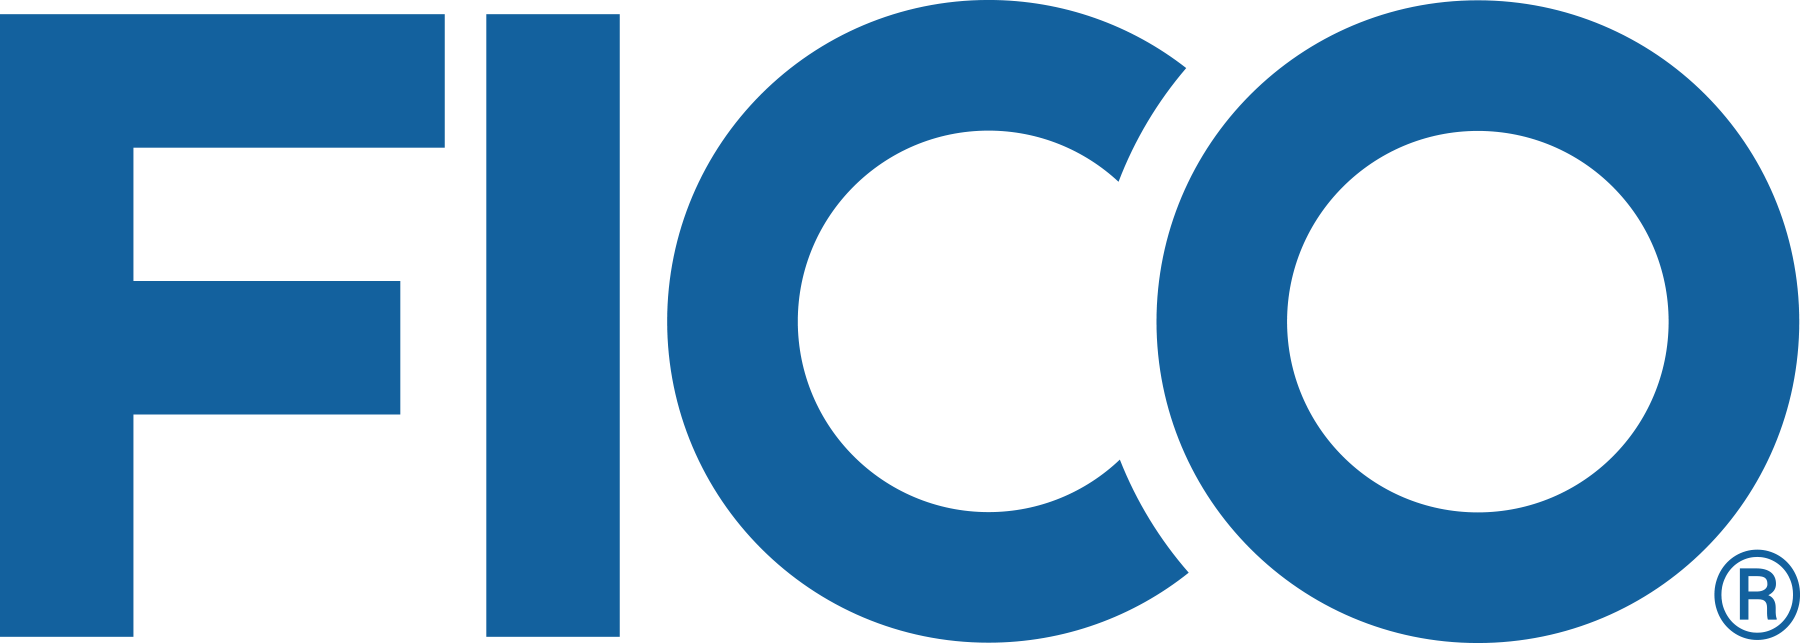 Arachnys and FICO Partner to Aid Financial Organisations in Managing Corporate KYC Requirements and Accelerating Compliance Processes